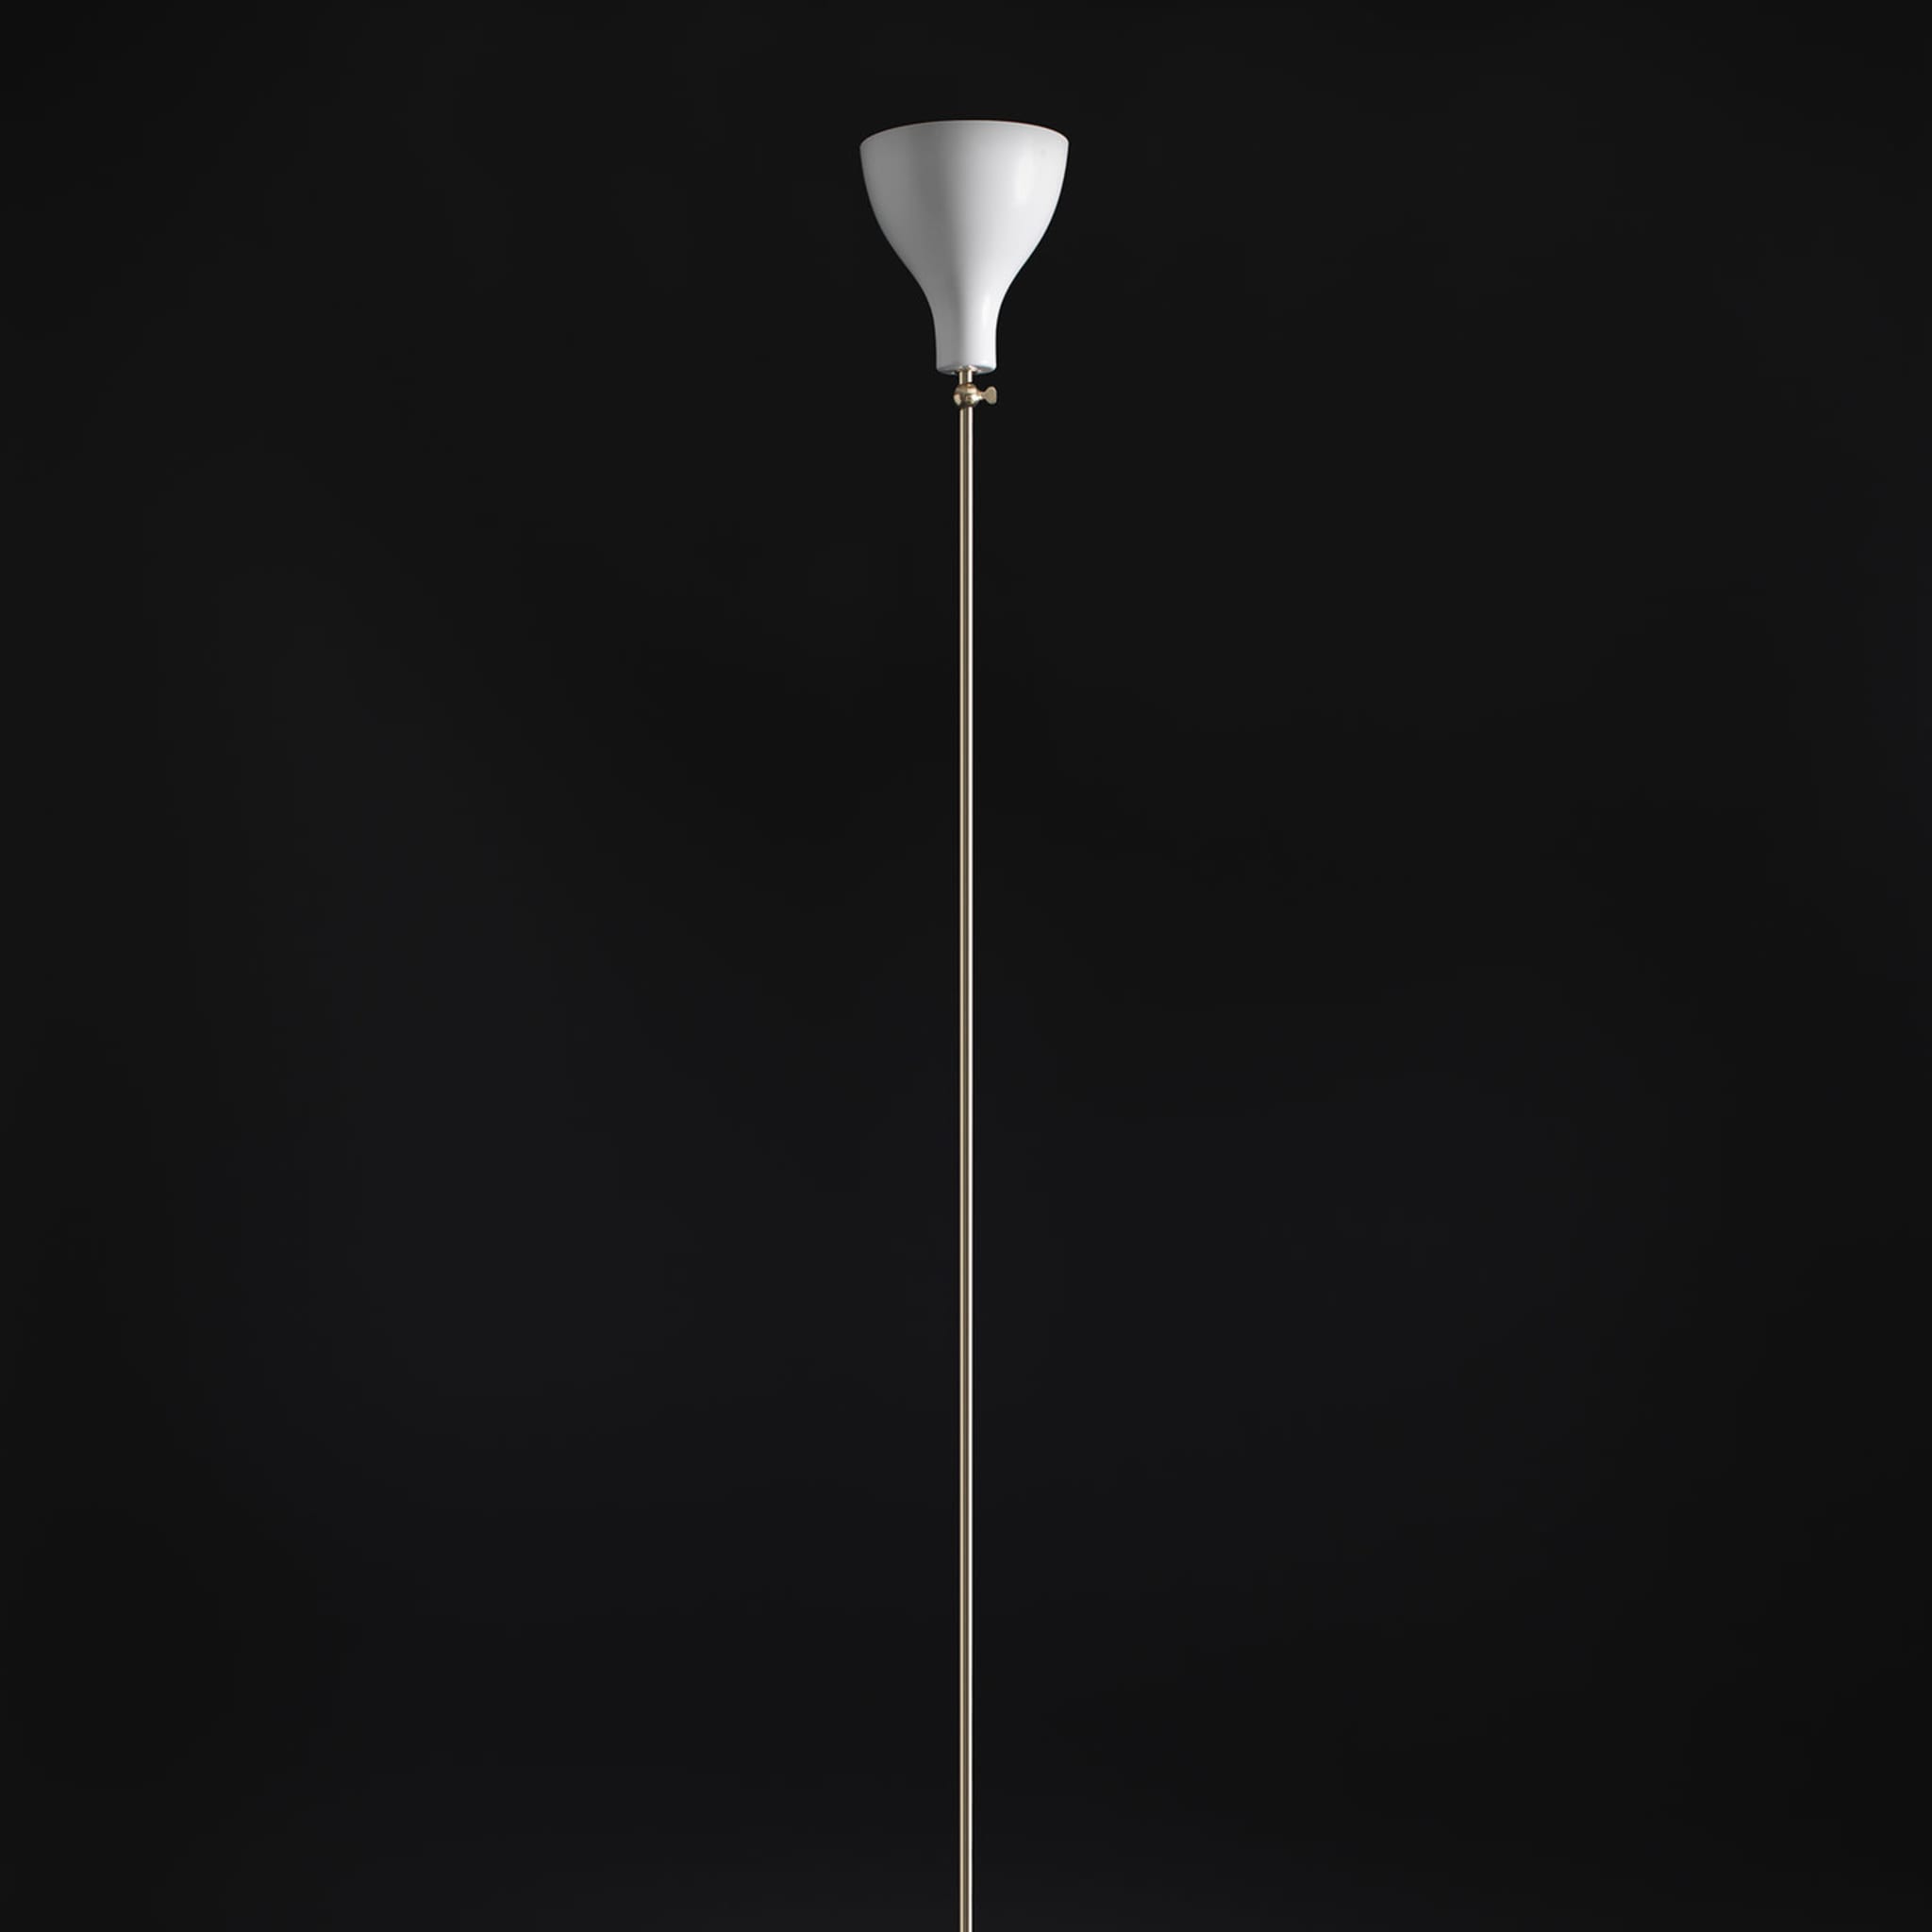 Lady V Black and White Tall Floor Lamp in Brass - Alternative view 5